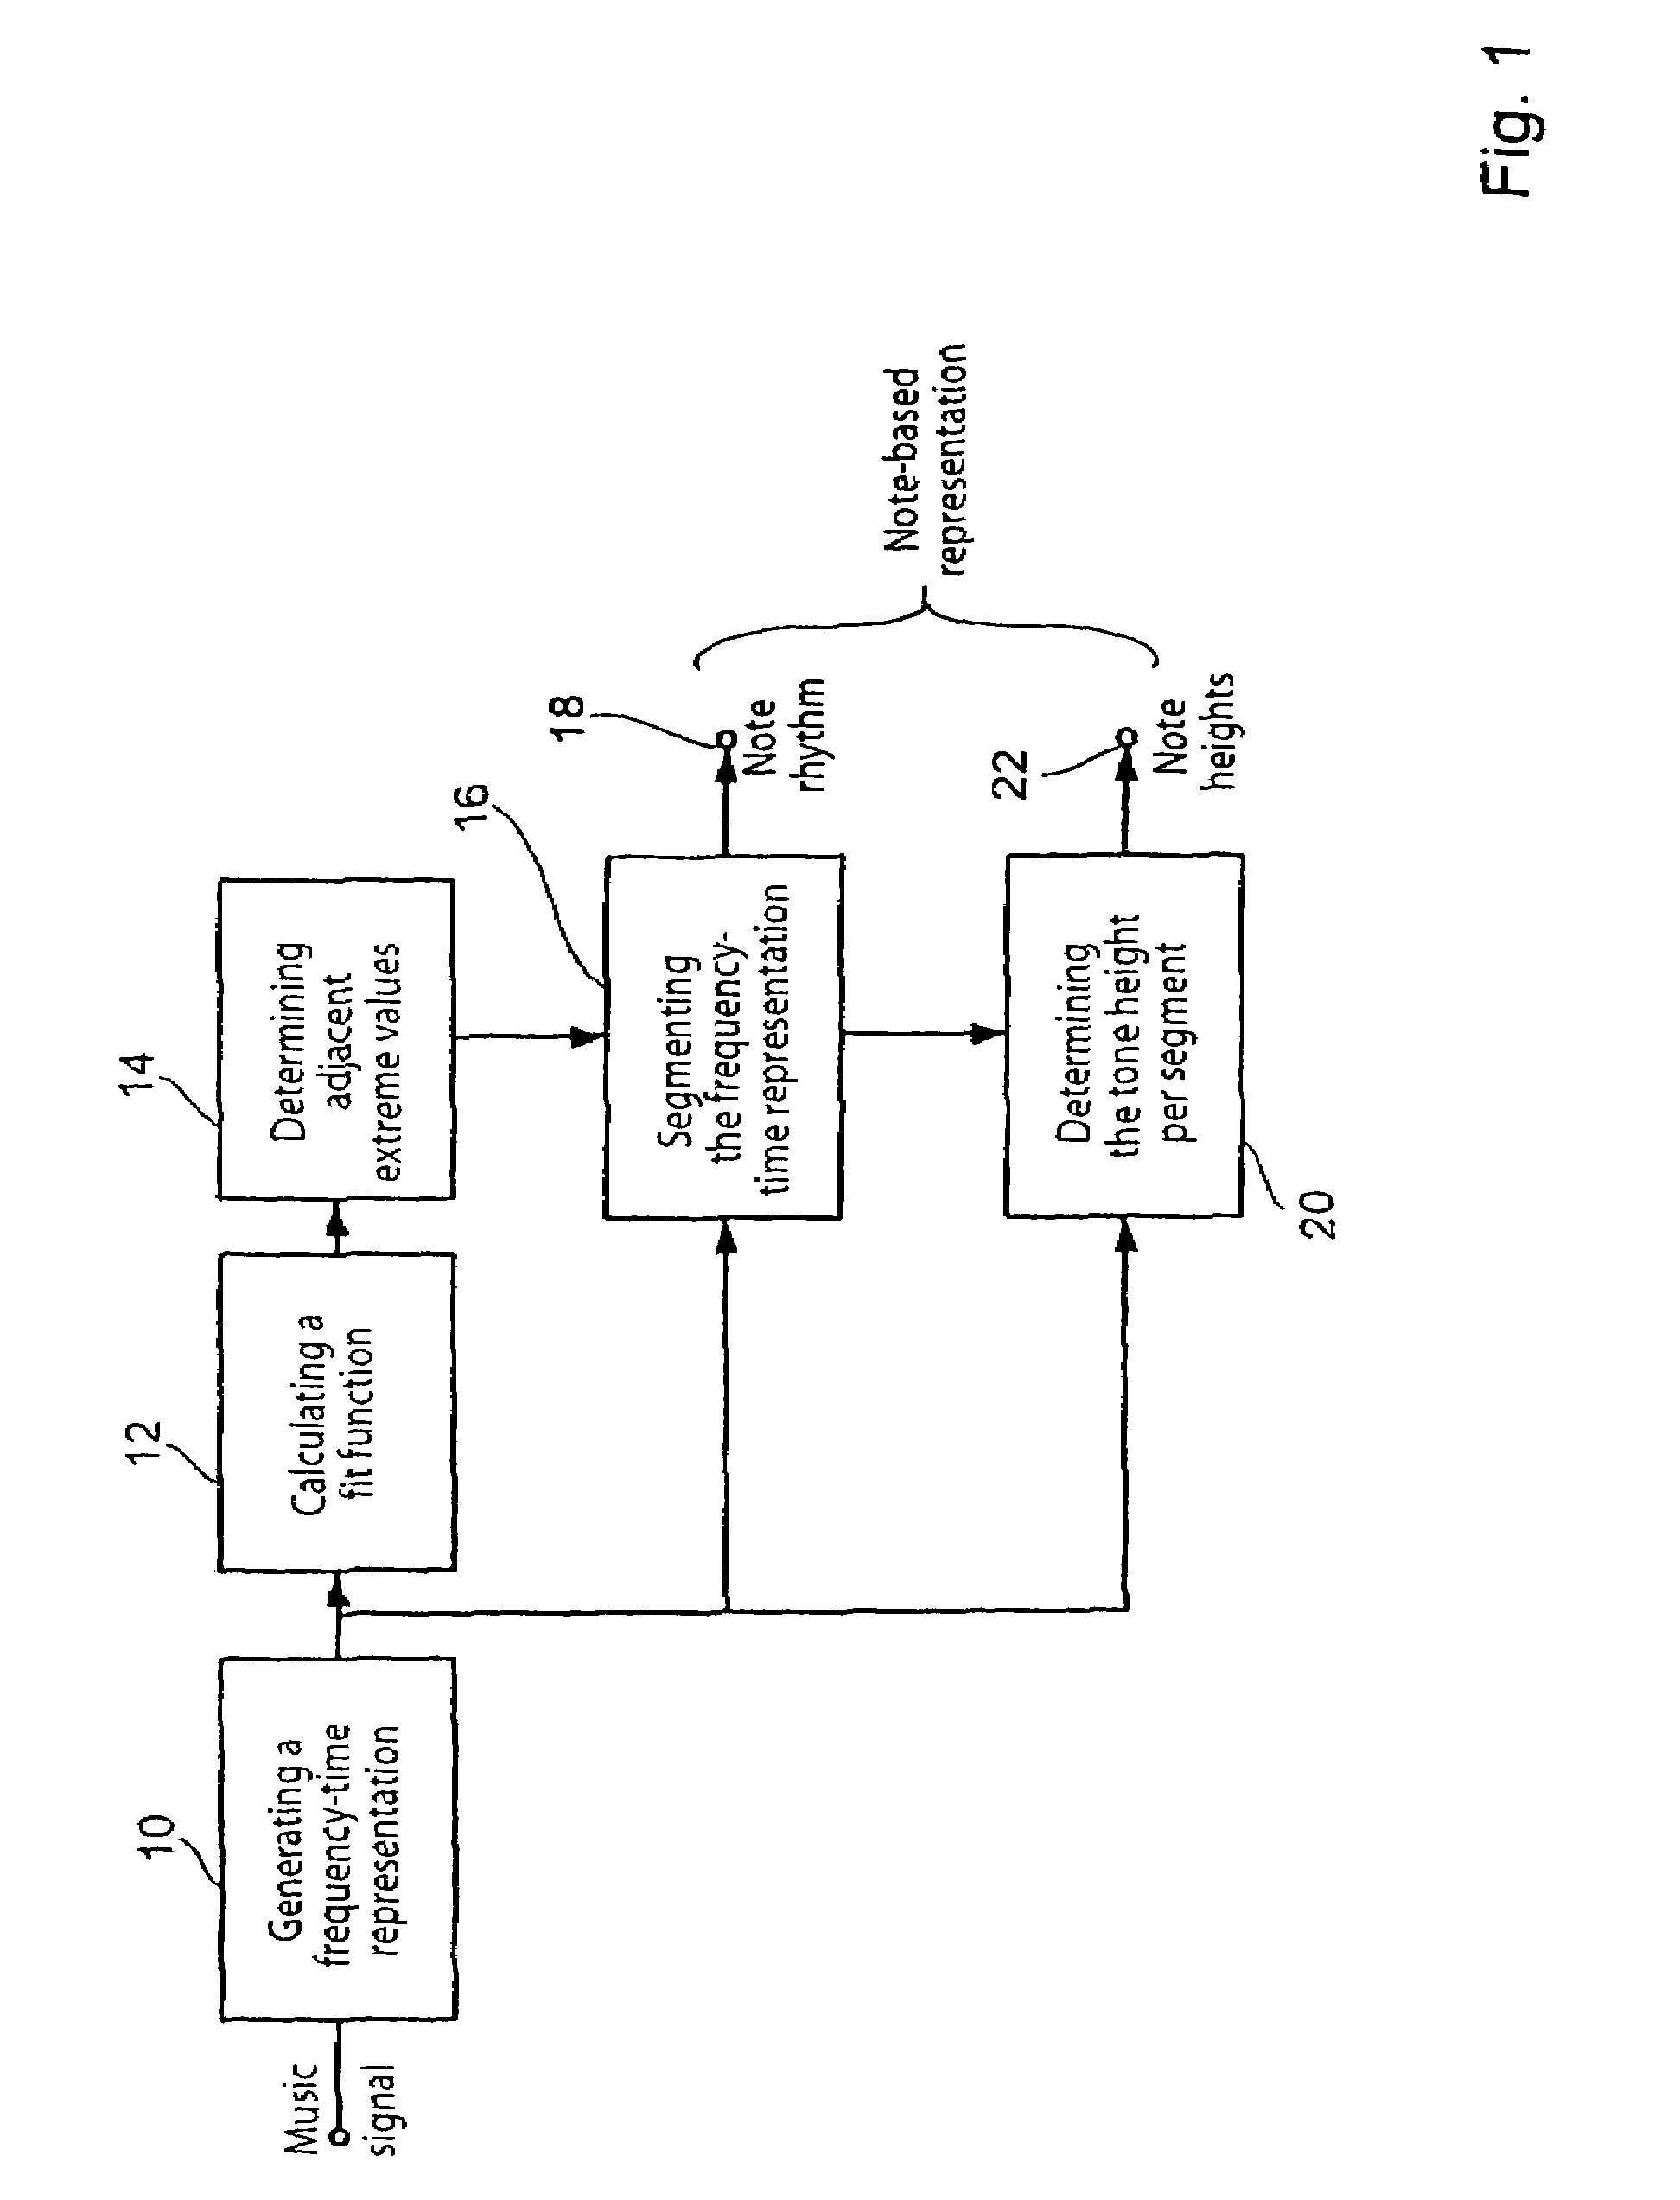 Method for converting a music signal into a note-based description and for referencing a music signal in a data bank